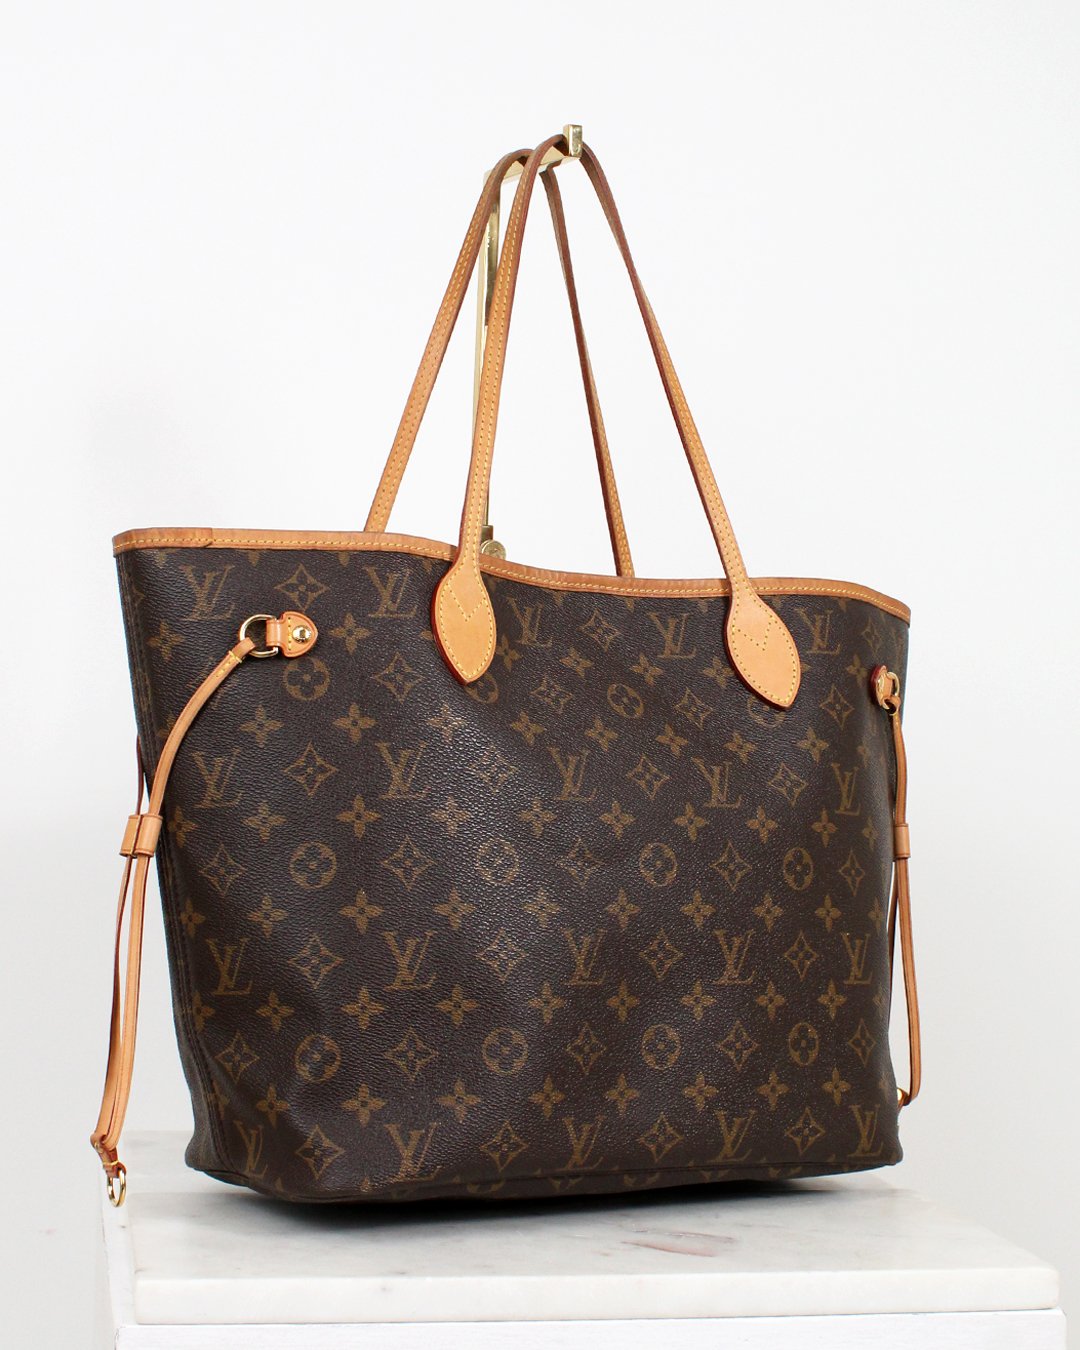 LOUIS VUITTON Monogram Canvas Red Neverfull MM Tote Bag